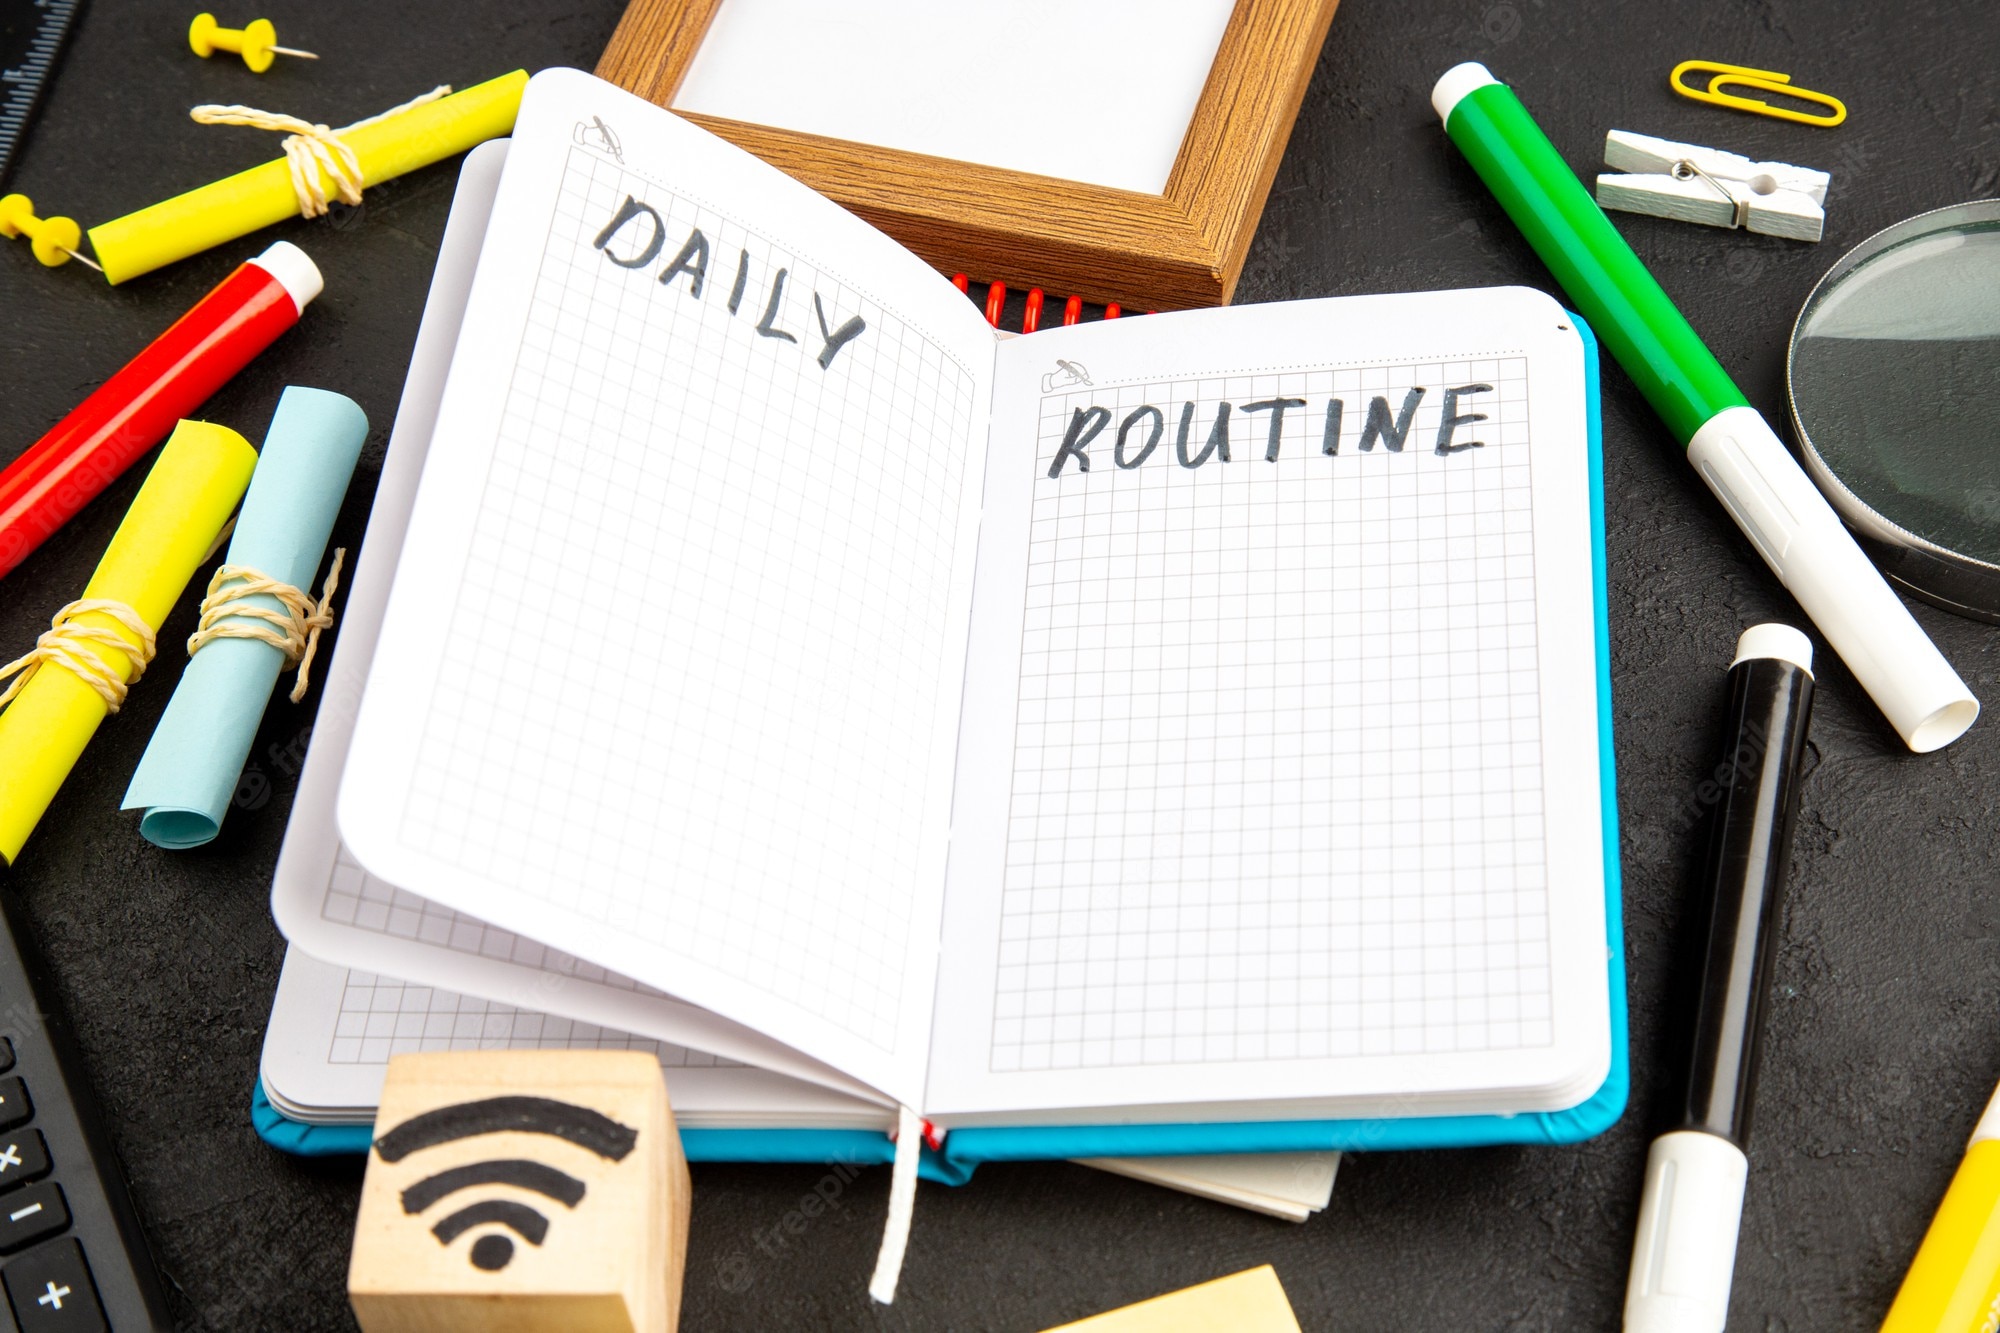 Daily Routine Image. Free Vectors, & PSD